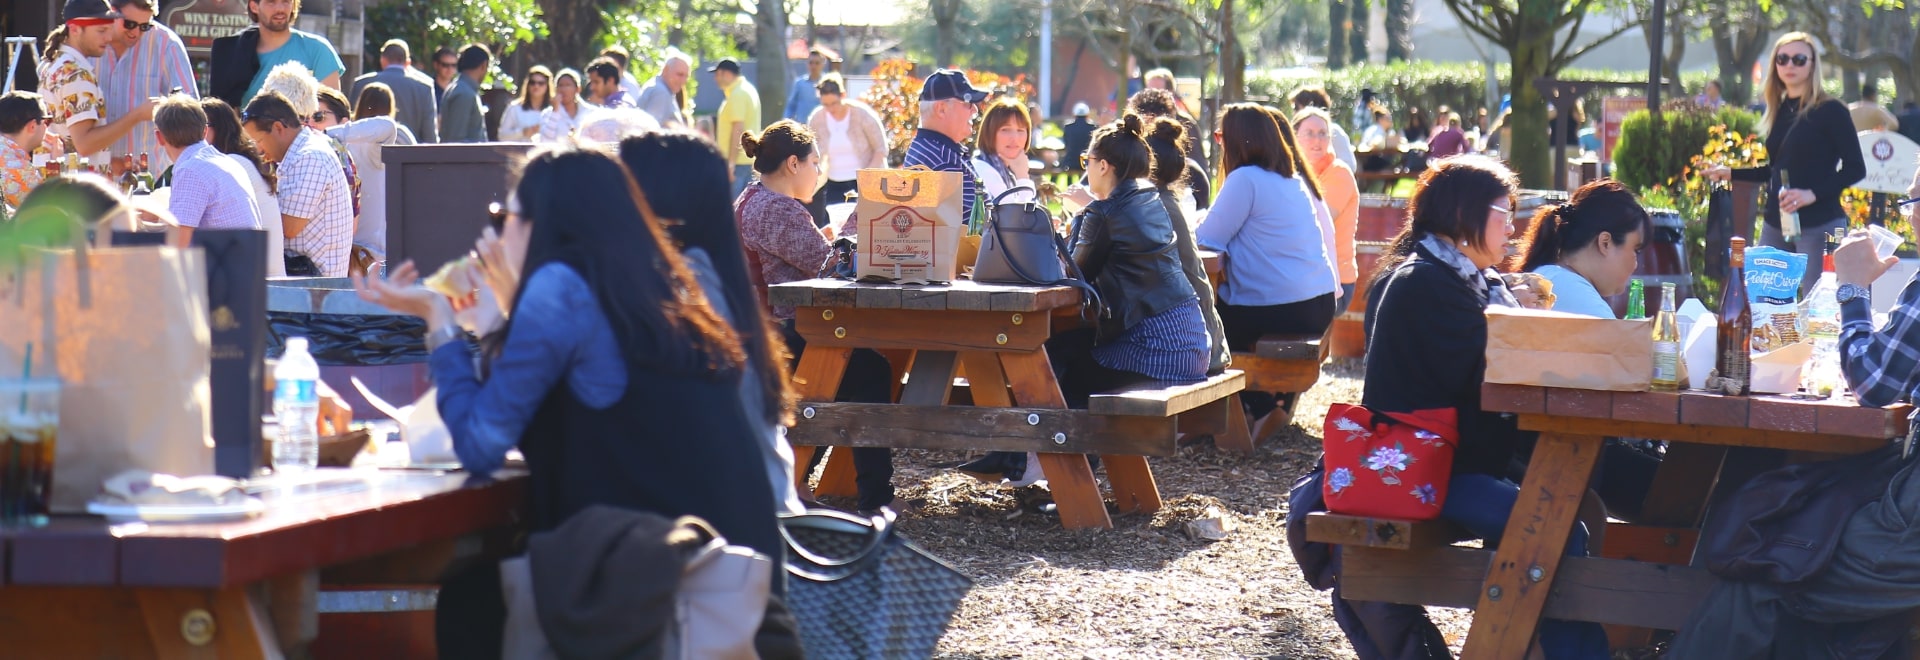 group of adults at picnic tables eating lunch